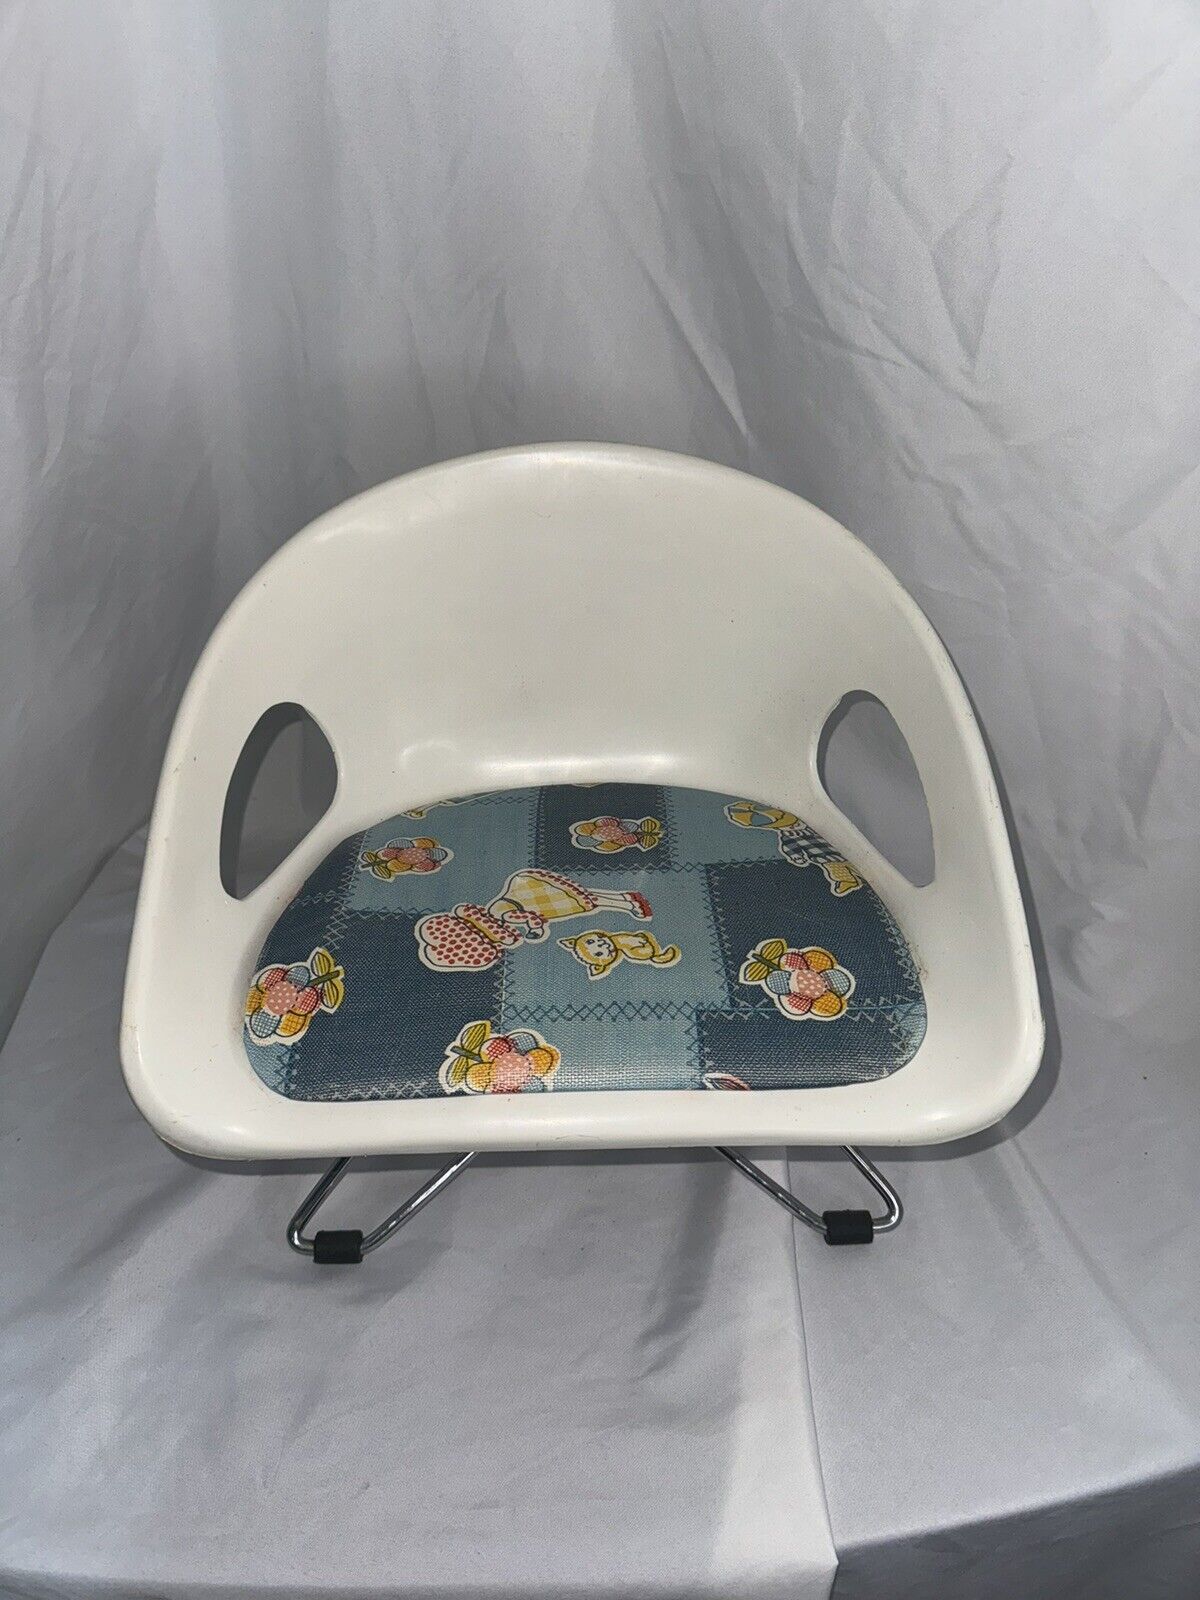 Vintage Childs Chair Booster Seat Cosco MCM Hairpin Legs Lawn Chair Blue Denim